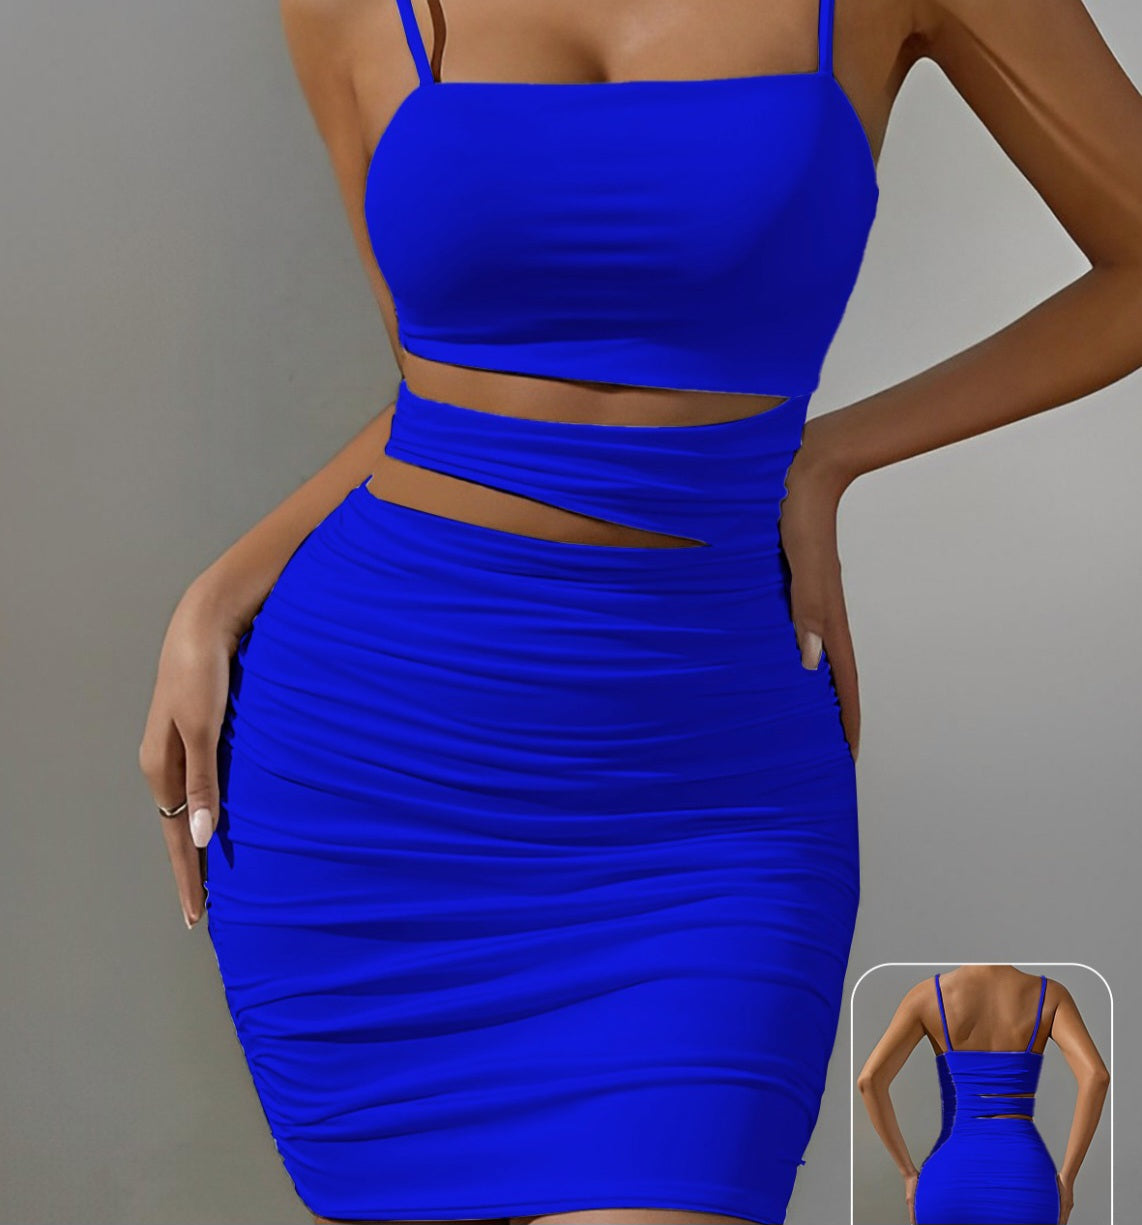 Lycra Dress With One Strap Open From The Stomach And Back With Tassels From  The Tail, The Lycra Company Address